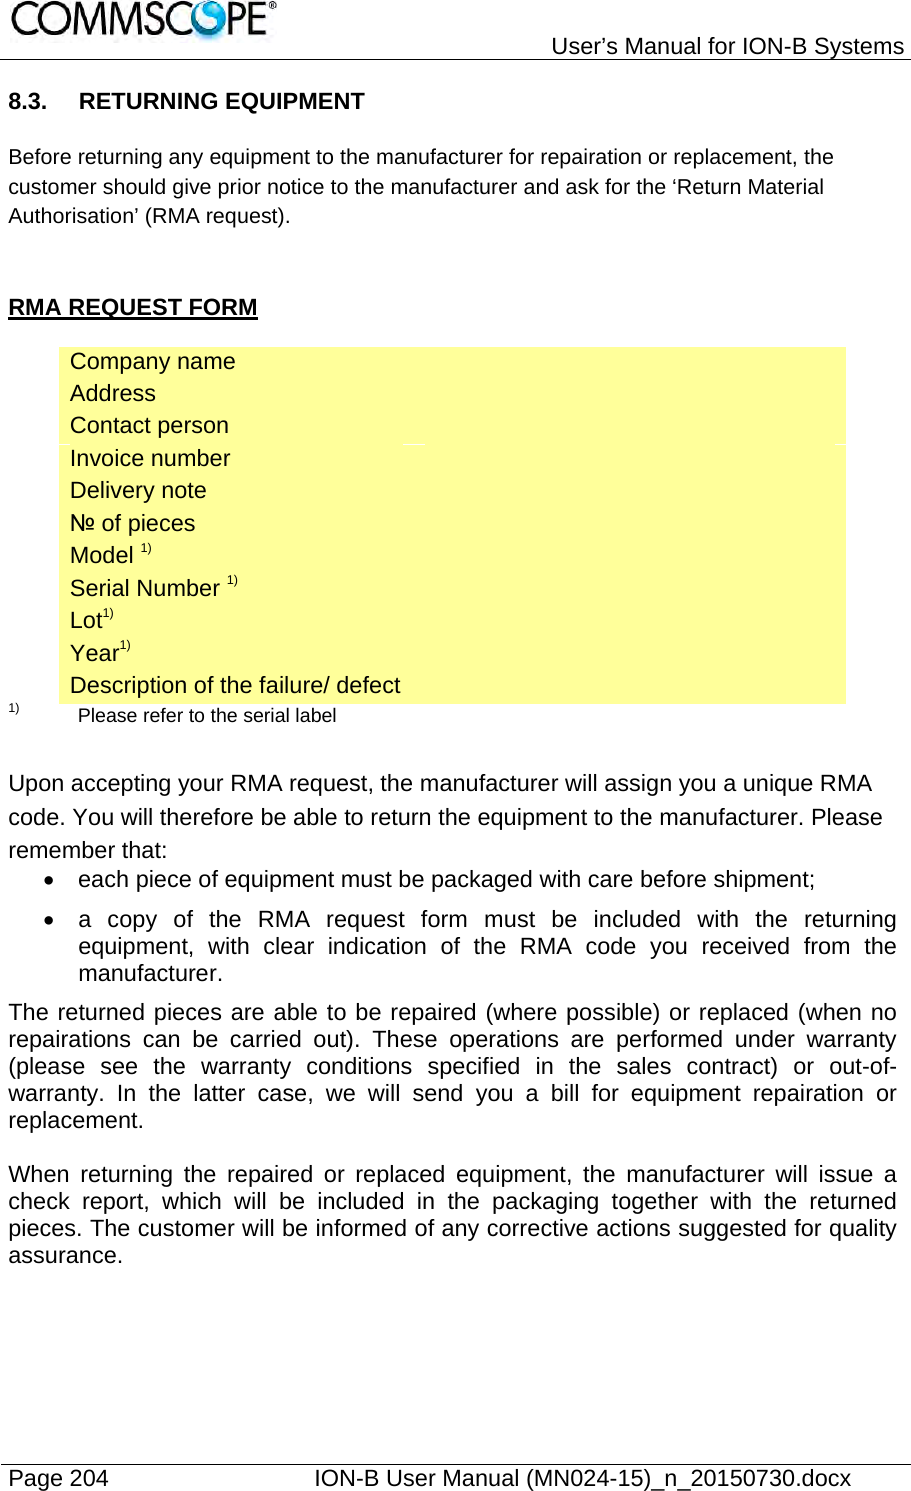   User’s Manual for ION-B Systems Page 204    ION-B User Manual (MN024-15)_n_20150730.docx  8.3. RETURNING EQUIPMENT  Before returning any equipment to the manufacturer for repairation or replacement, the customer should give prior notice to the manufacturer and ask for the ‘Return Material Authorisation’ (RMA request).   RMA REQUEST FORM  Company name   Address   Contact person   Invoice number   Delivery note   № of pieces   Model 1)   Serial Number 1)   Lot1)   Year1)   Description of the failure/ defect   1)   Please refer to the serial label   Upon accepting your RMA request, the manufacturer will assign you a unique RMA code. You will therefore be able to return the equipment to the manufacturer. Please remember that:   each piece of equipment must be packaged with care before shipment;   a copy of the RMA request form must be included with the returning equipment, with clear indication of the RMA code you received from the manufacturer. The returned pieces are able to be repaired (where possible) or replaced (when no repairations can be carried out). These operations are performed under warranty (please see the warranty conditions specified in the sales contract) or out-of-warranty. In the latter case, we will send you a bill for equipment repairation or replacement.  When returning the repaired or replaced equipment, the manufacturer will issue a check report, which will be included in the packaging together with the returned pieces. The customer will be informed of any corrective actions suggested for quality assurance. 